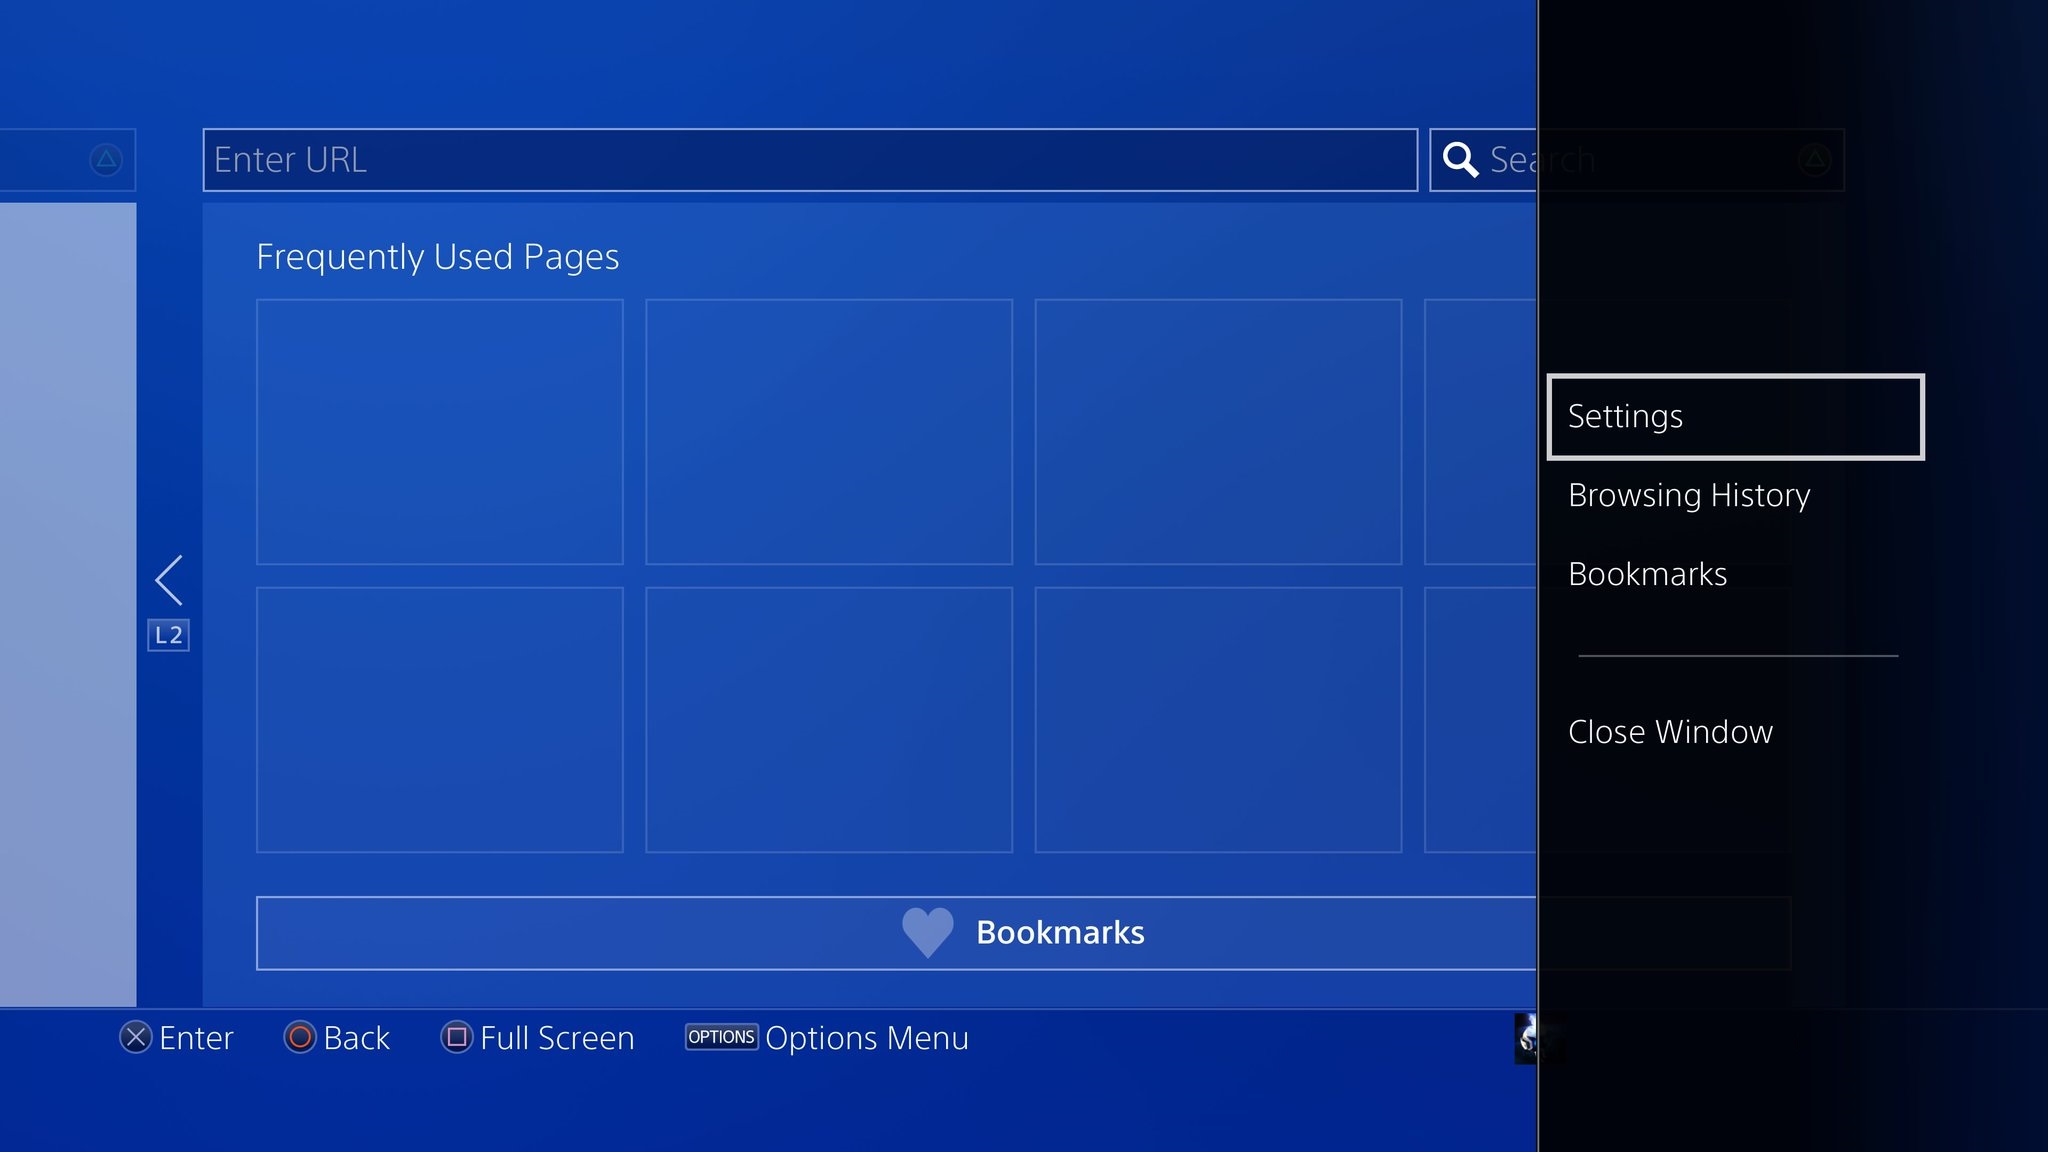 How to Use the PS4 Web Browser